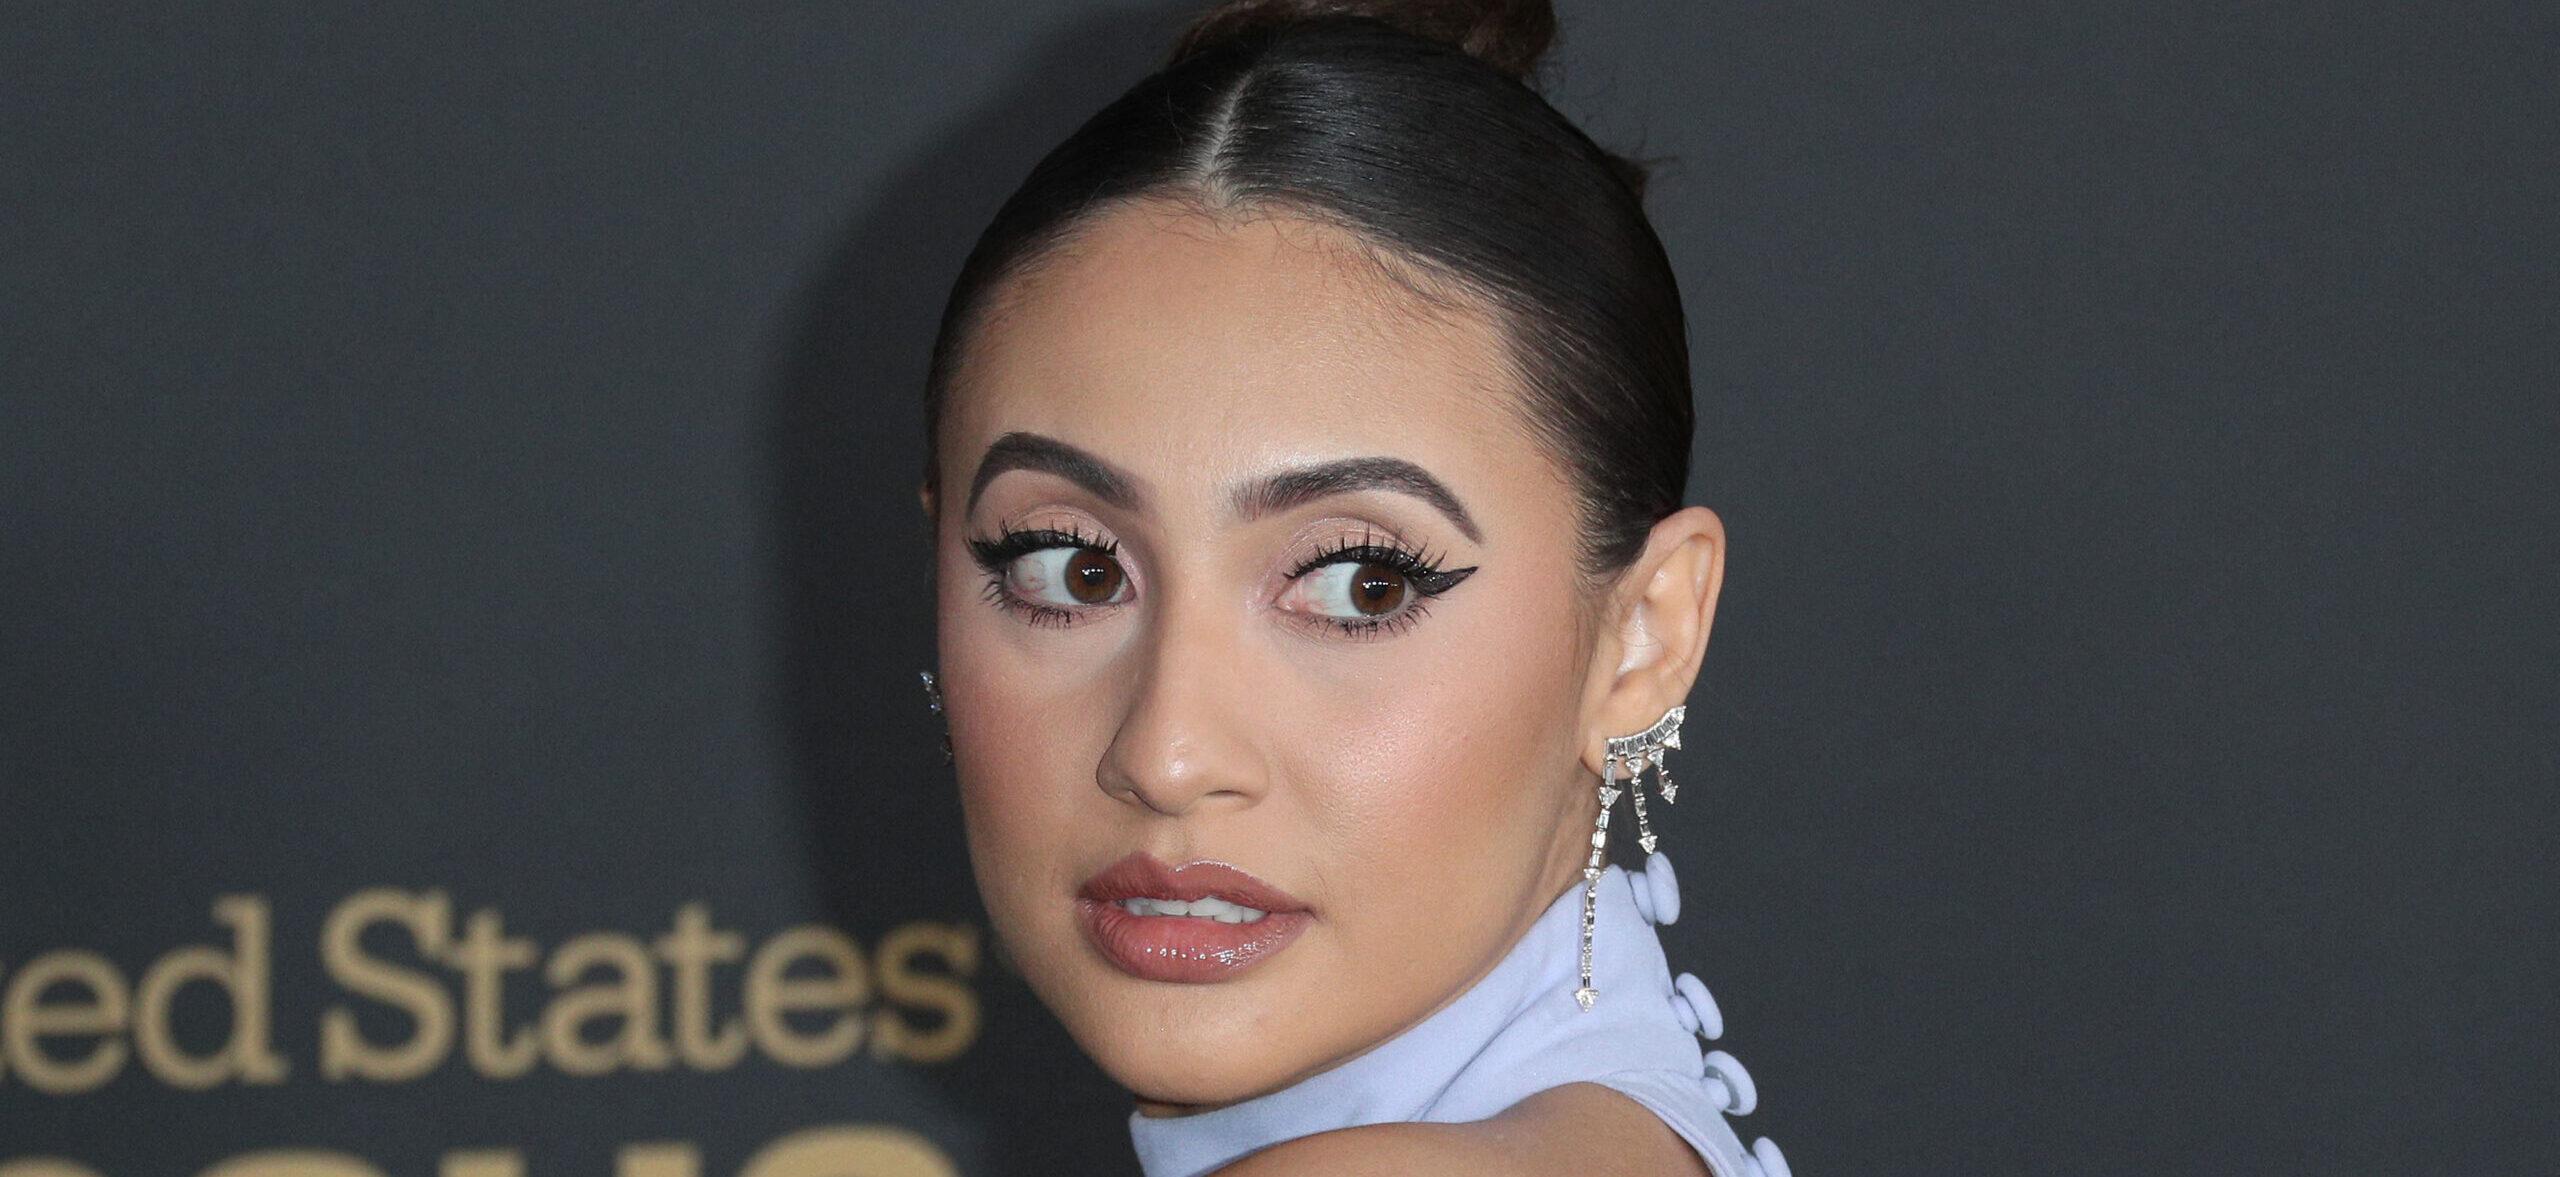 Francia Raisa’s Curves Commands Attention Following End To Feud Rumors